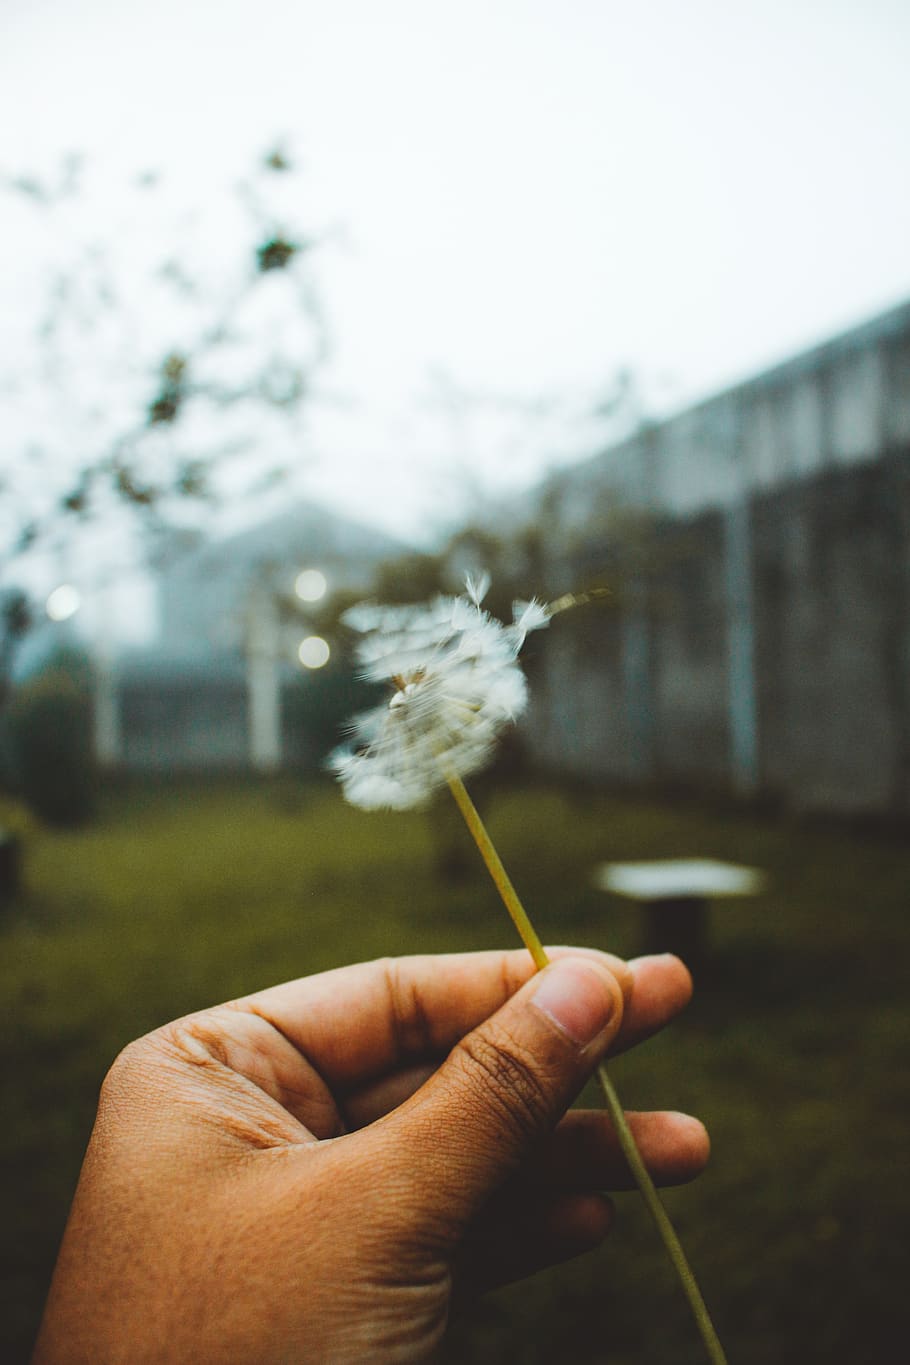 person holding white dandelion flower during daytime, human hand